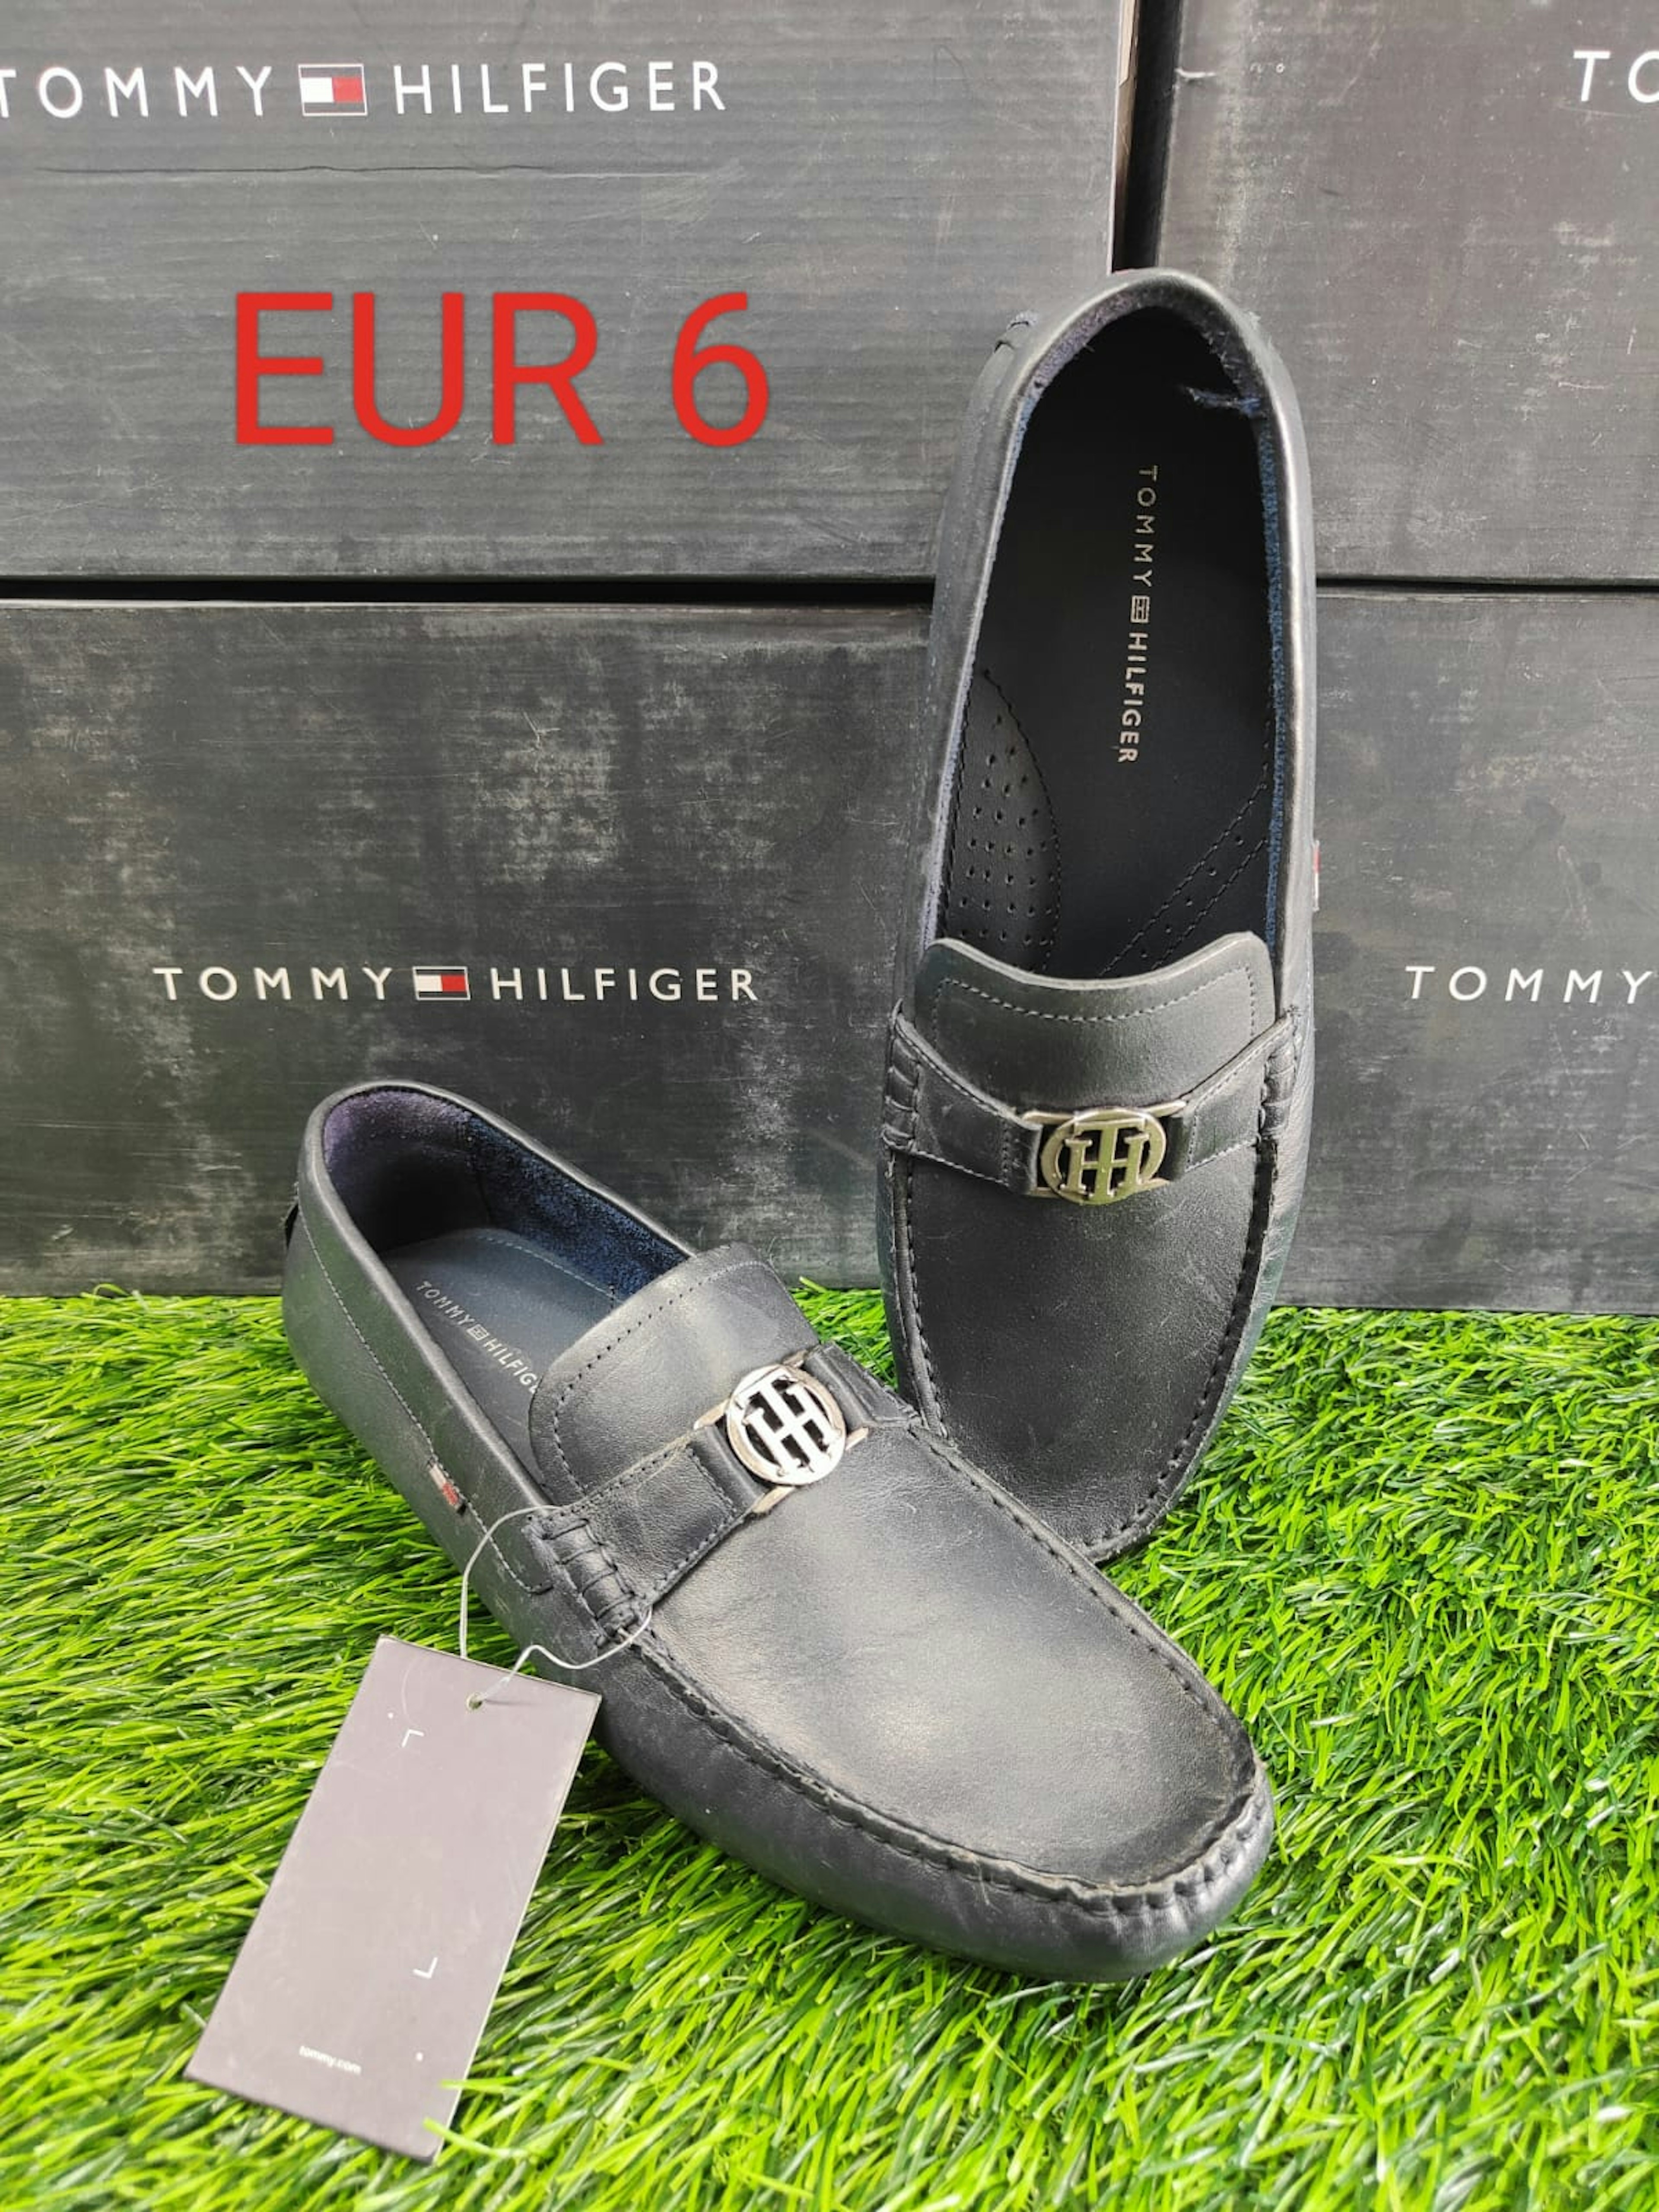 View - TOMMY HILFIGER lofar shoes photos, TOMMY HILFIGER lofar shoes available in Surendranagar, make deal in 3250